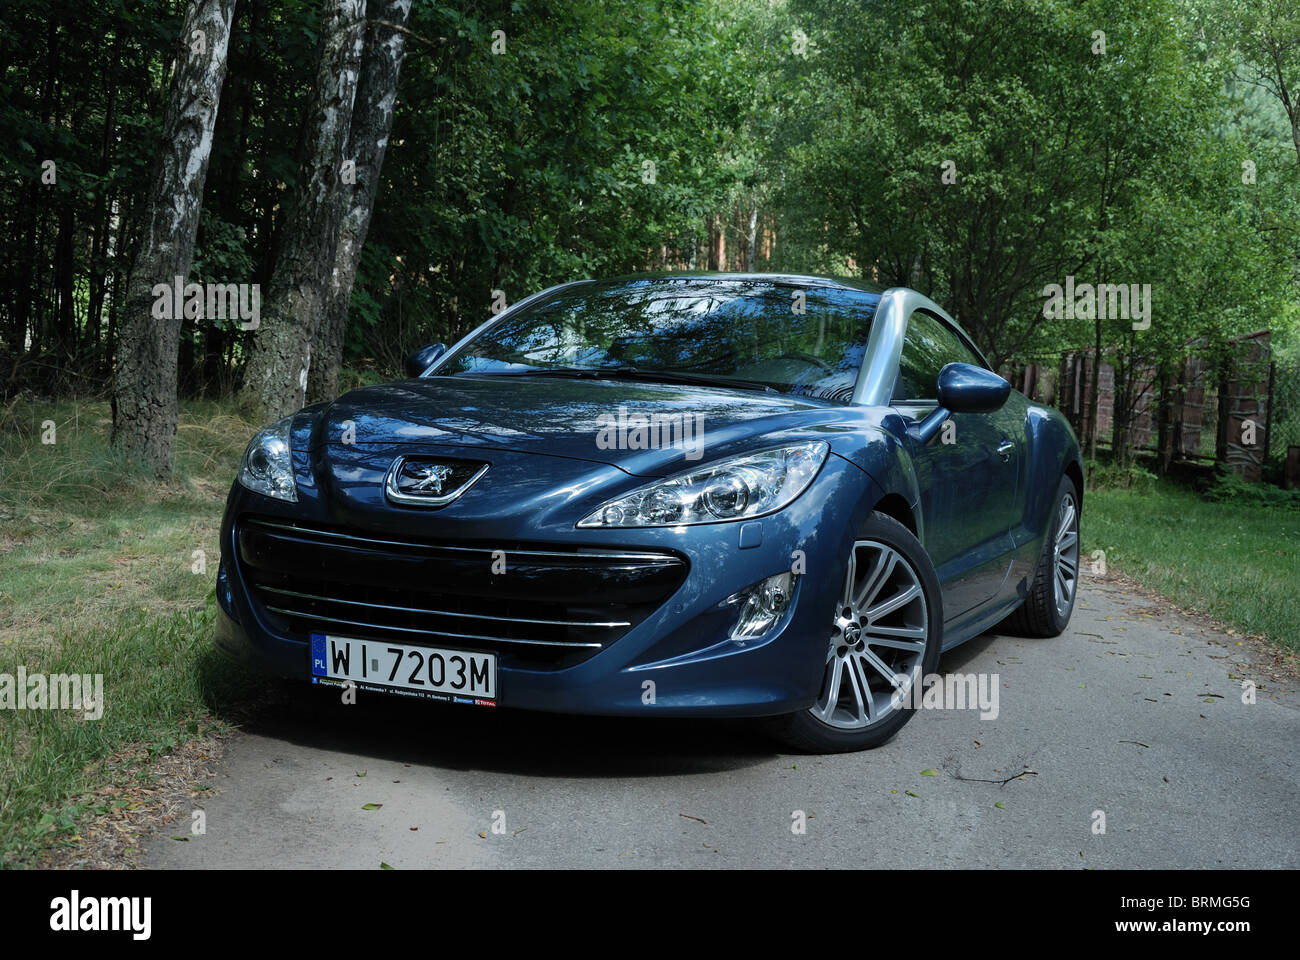 Peugeot RCZ  HDi - MY 2010 - blue metallic - French popular compact  coupe, sports car - in a park Stock Photo - Alamy